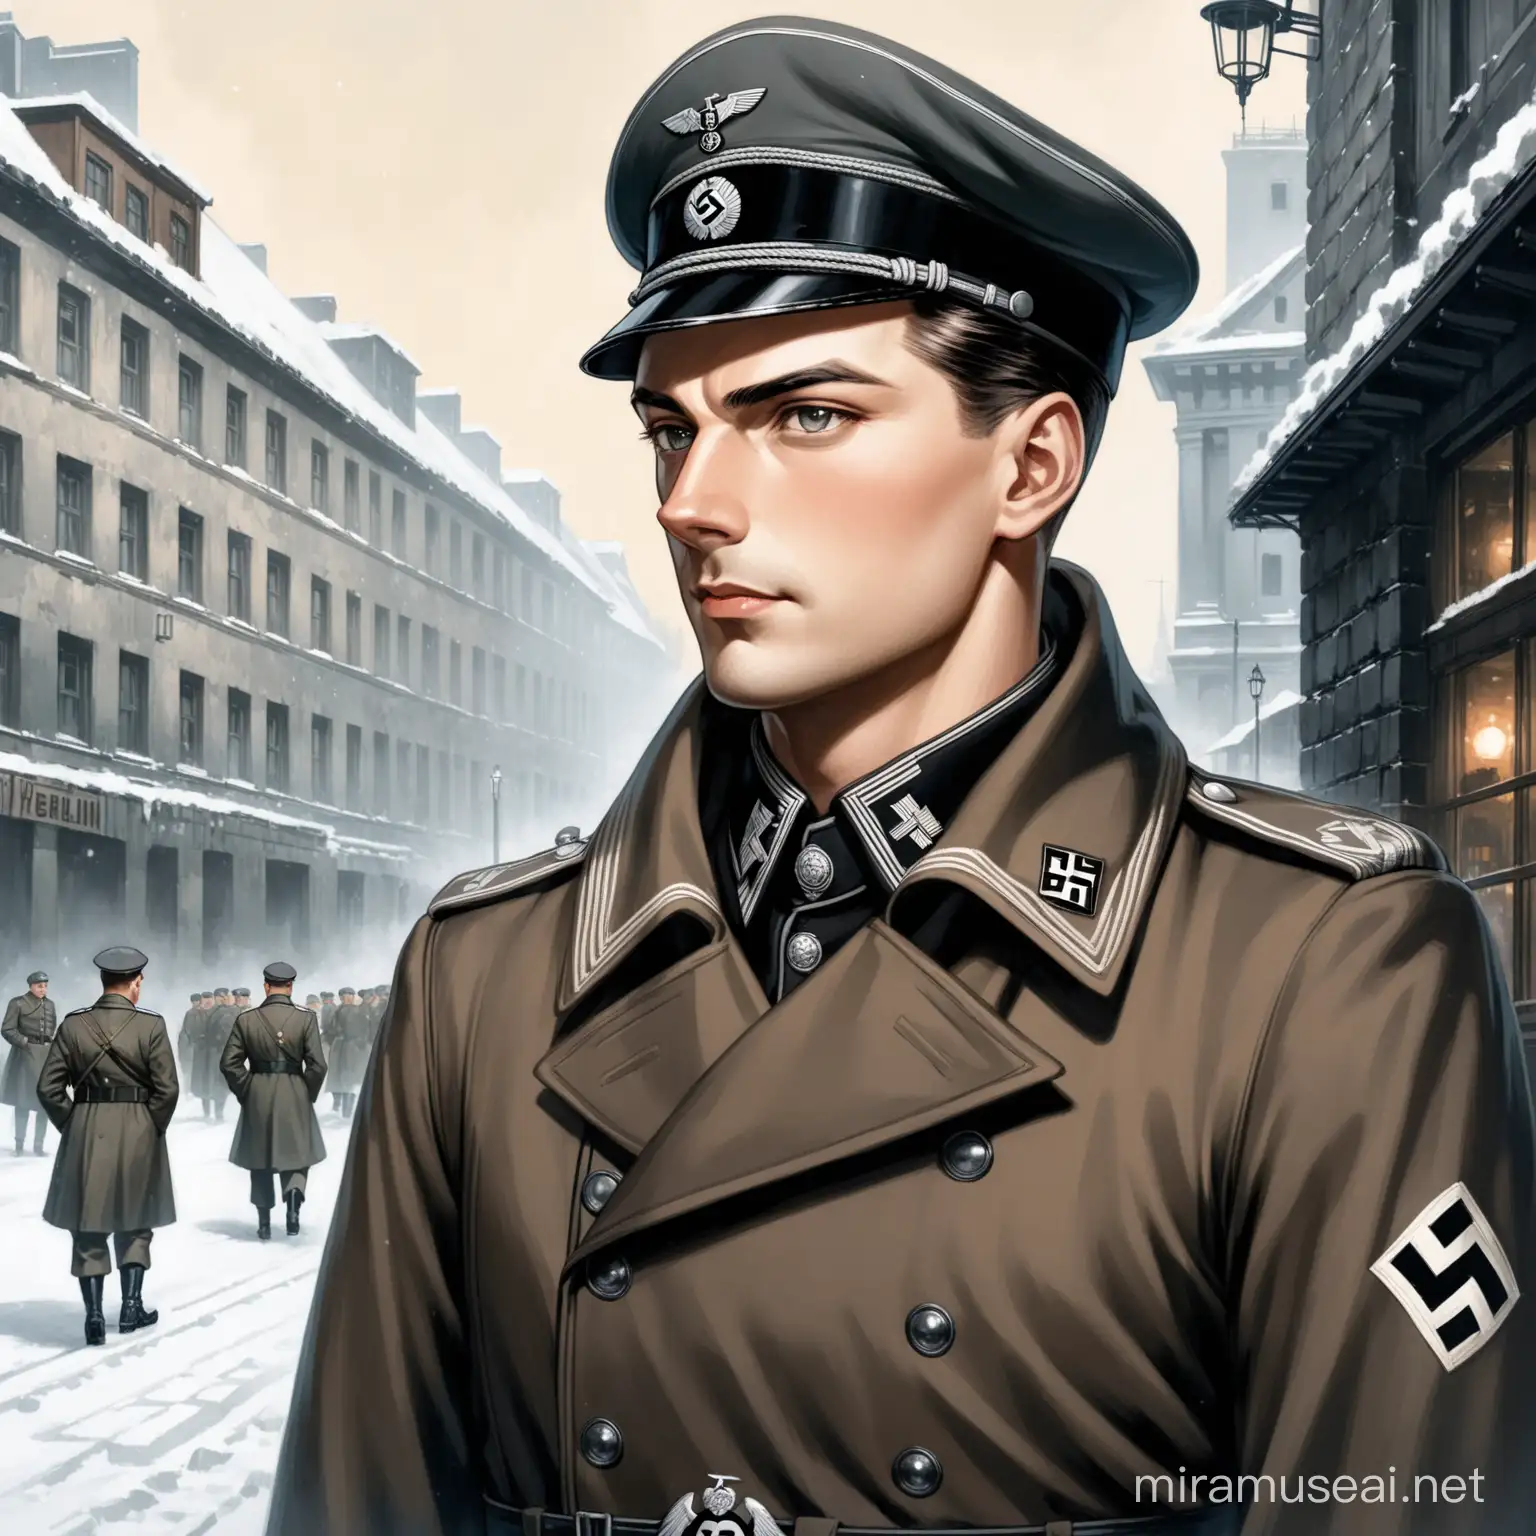 A handsome German SS officer in WW2, semi-realism art-style male in almost semi-anime-like, late thirties. Dark as coal hair combed to the side. Trench coat with a swastika armband, Nazi cap. Gunmetal gray colored eyes. Standing, half body view, at Berlin bar 1940s in winter.